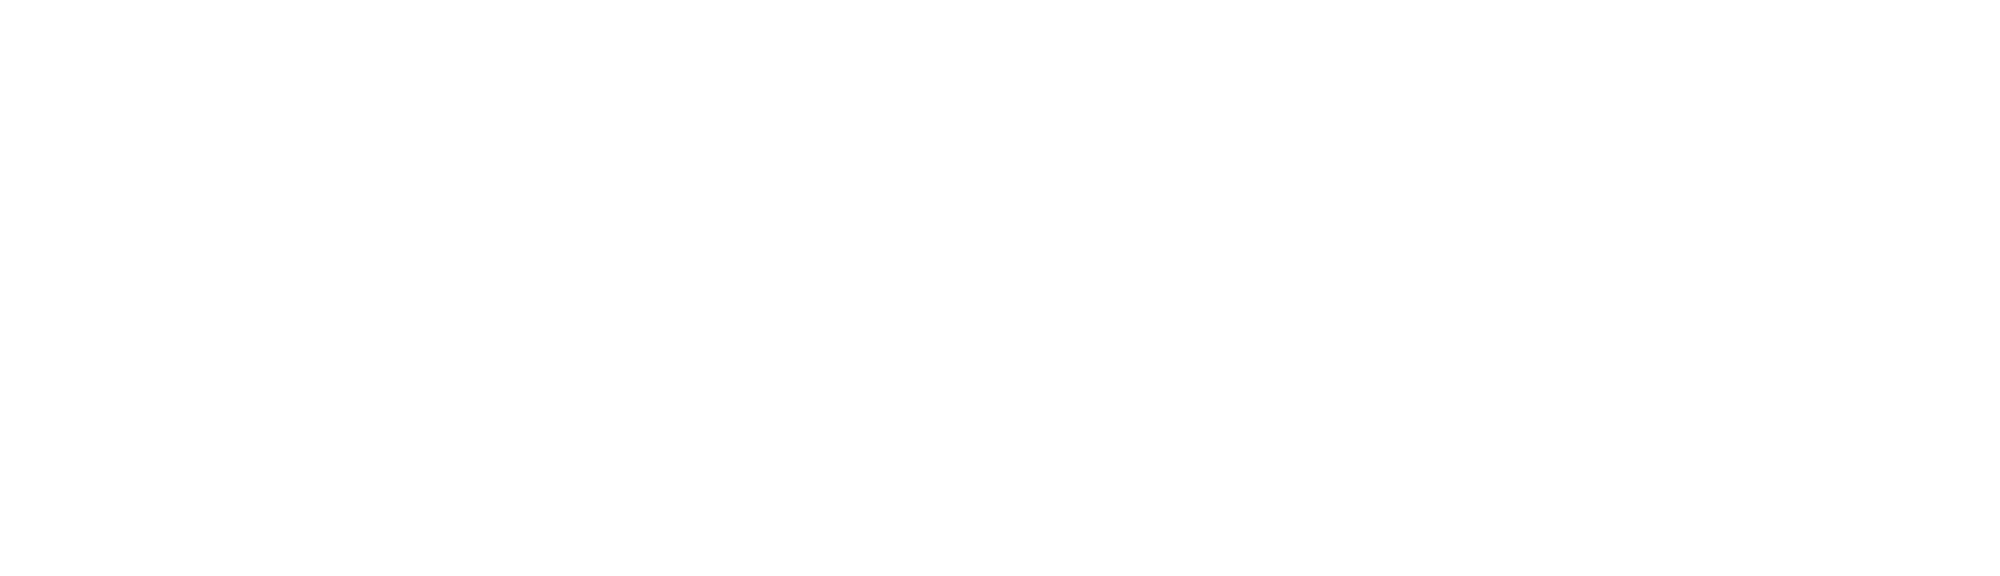 Solvent Networks - For the health of your business